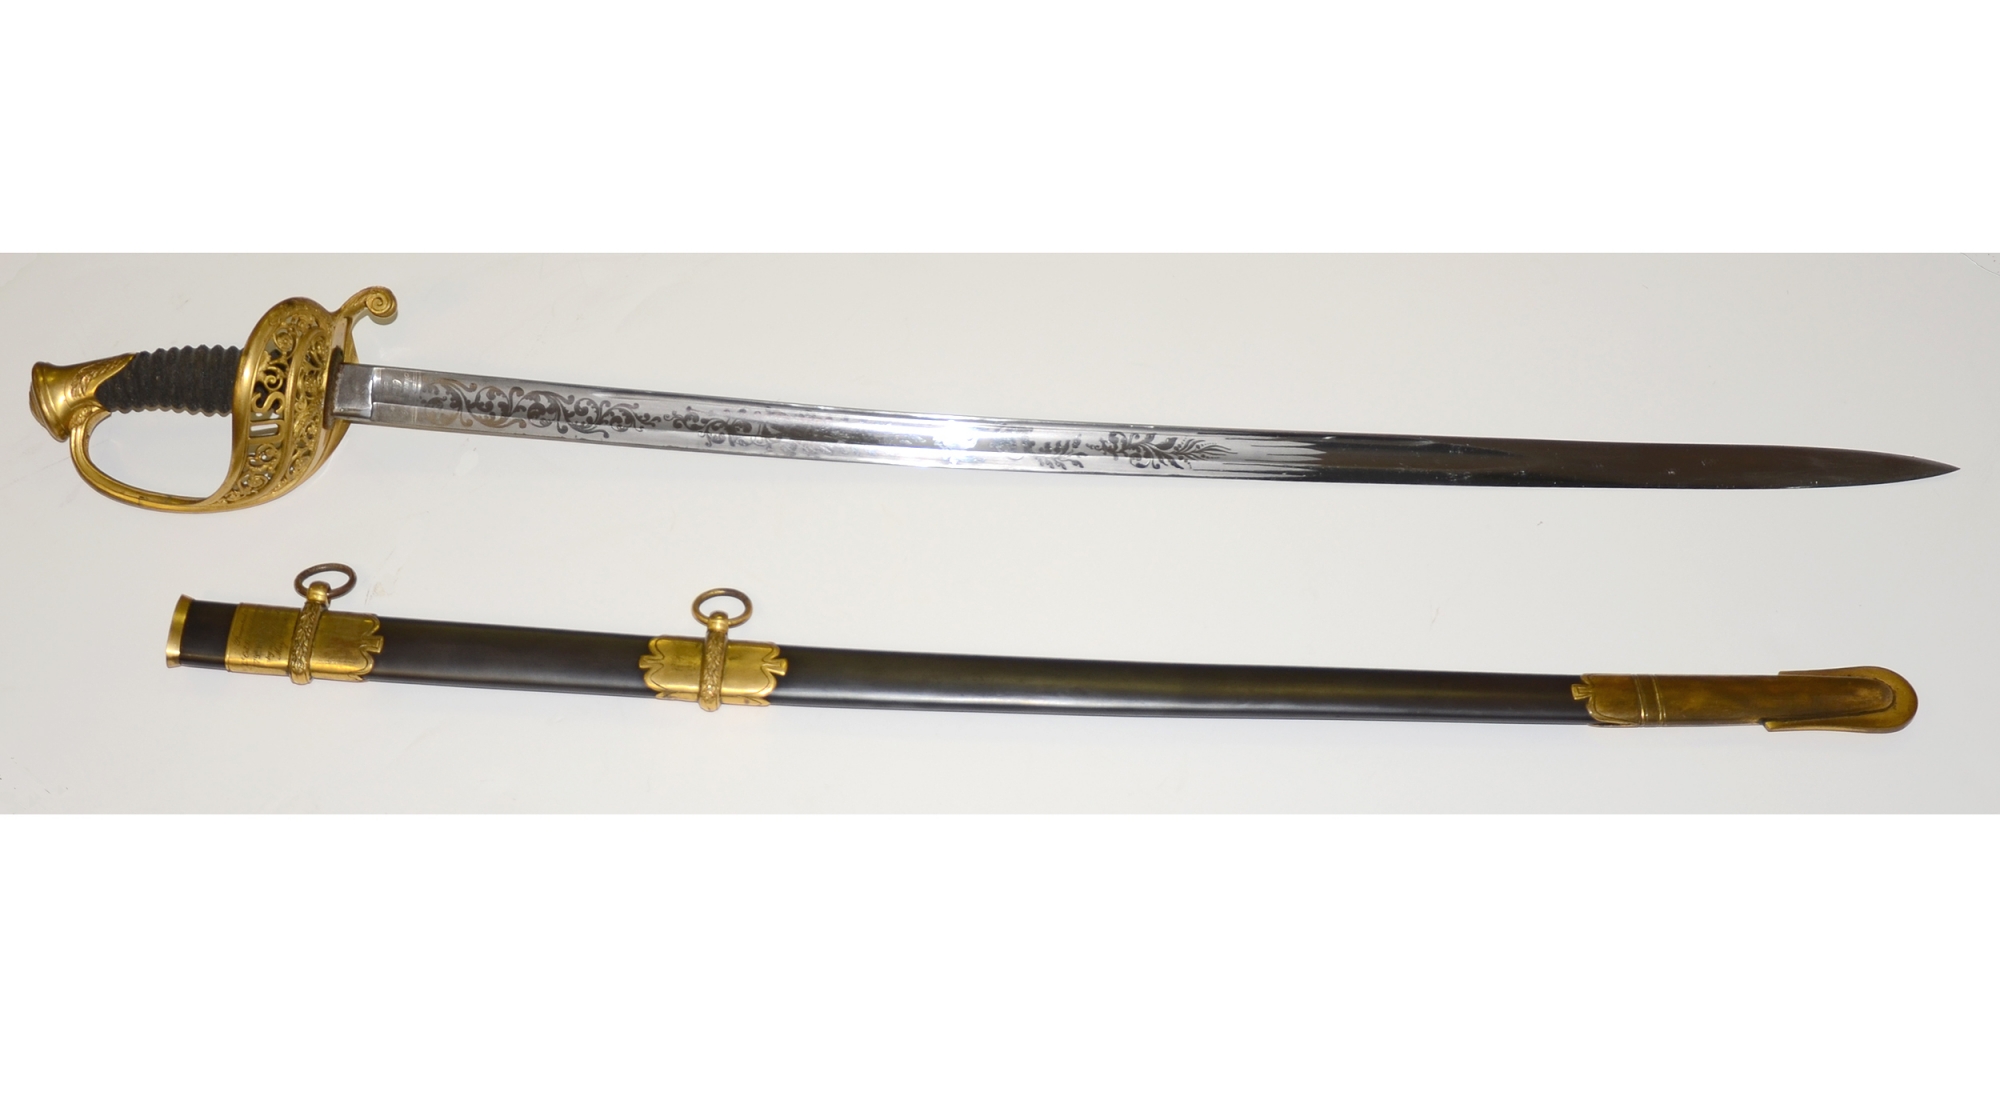 FANTASTIC CONDITION AMES MANUFACTURED MODEL 1850 FIELD & STAFF OFFICER'S  SWORD PRESENTED TO COLONEL DAVID MORRISON OF THE 79TH NEW YORK HIGHLANDERS  IN 1862 — Horse Soldier